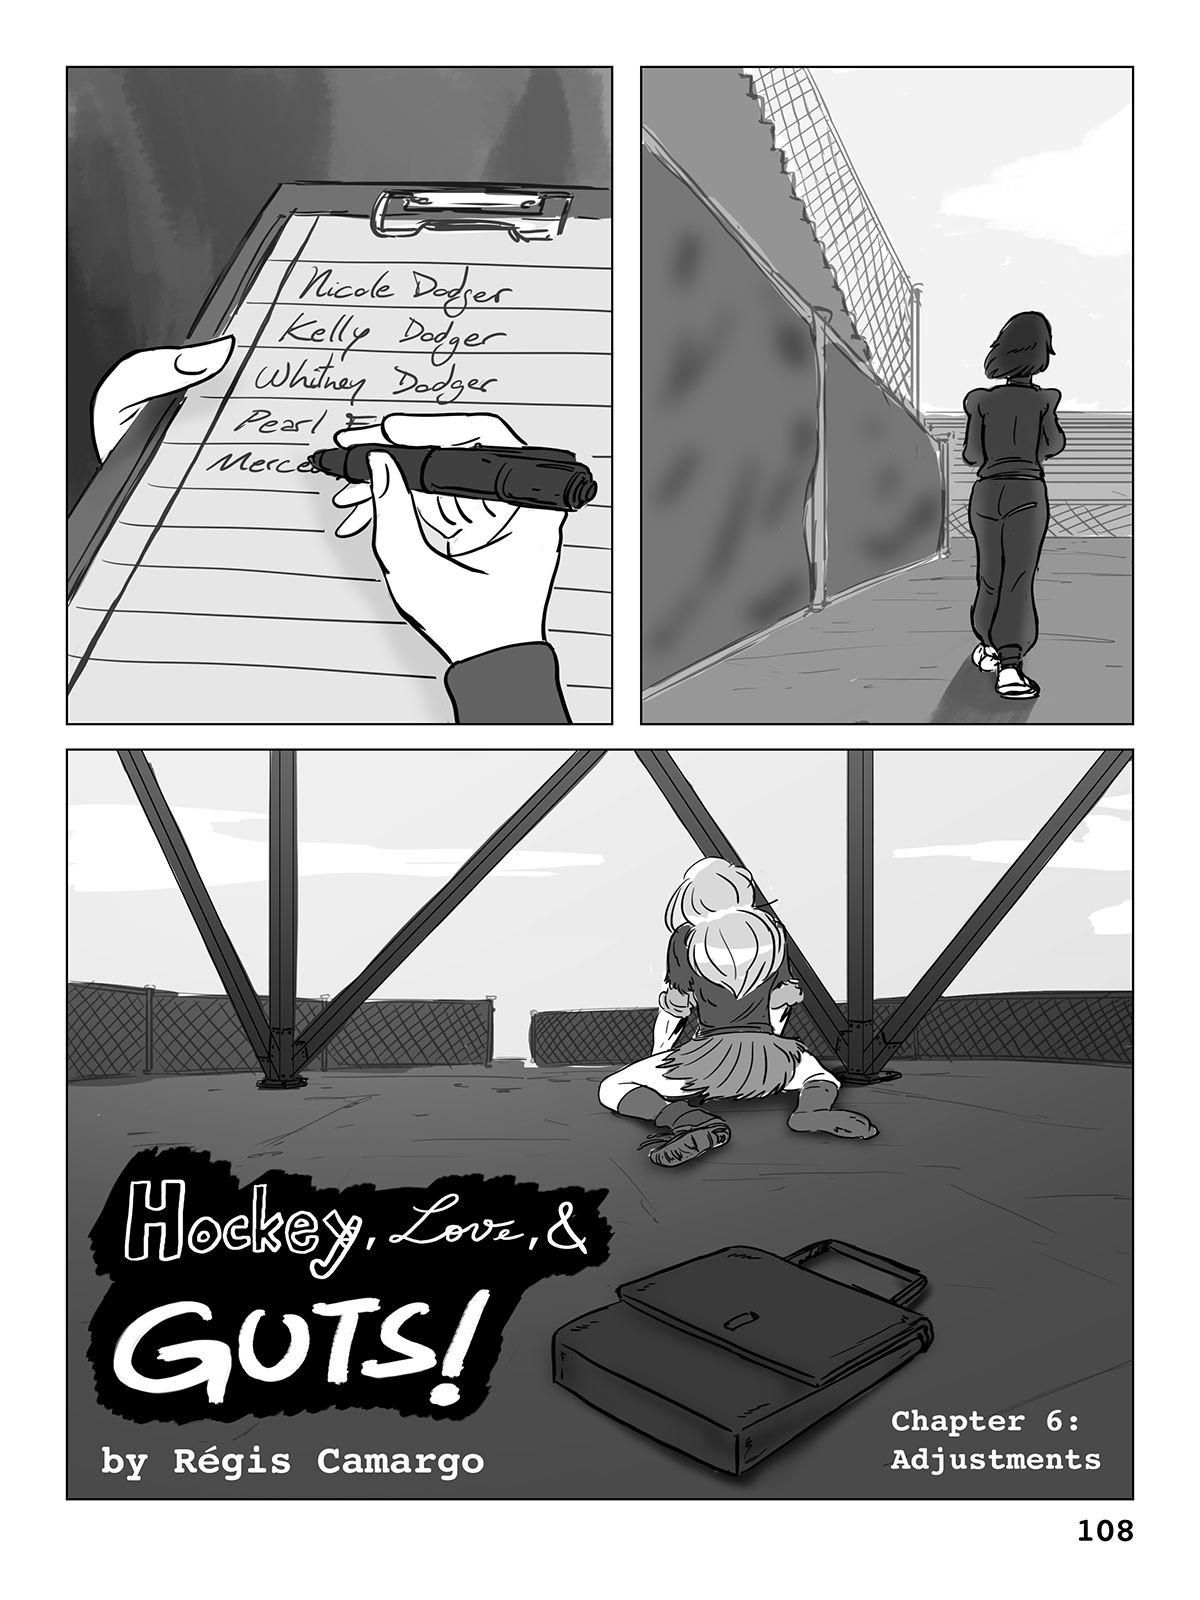 Hockey, Love, & GUTS! – Chapter 6 – Page 108